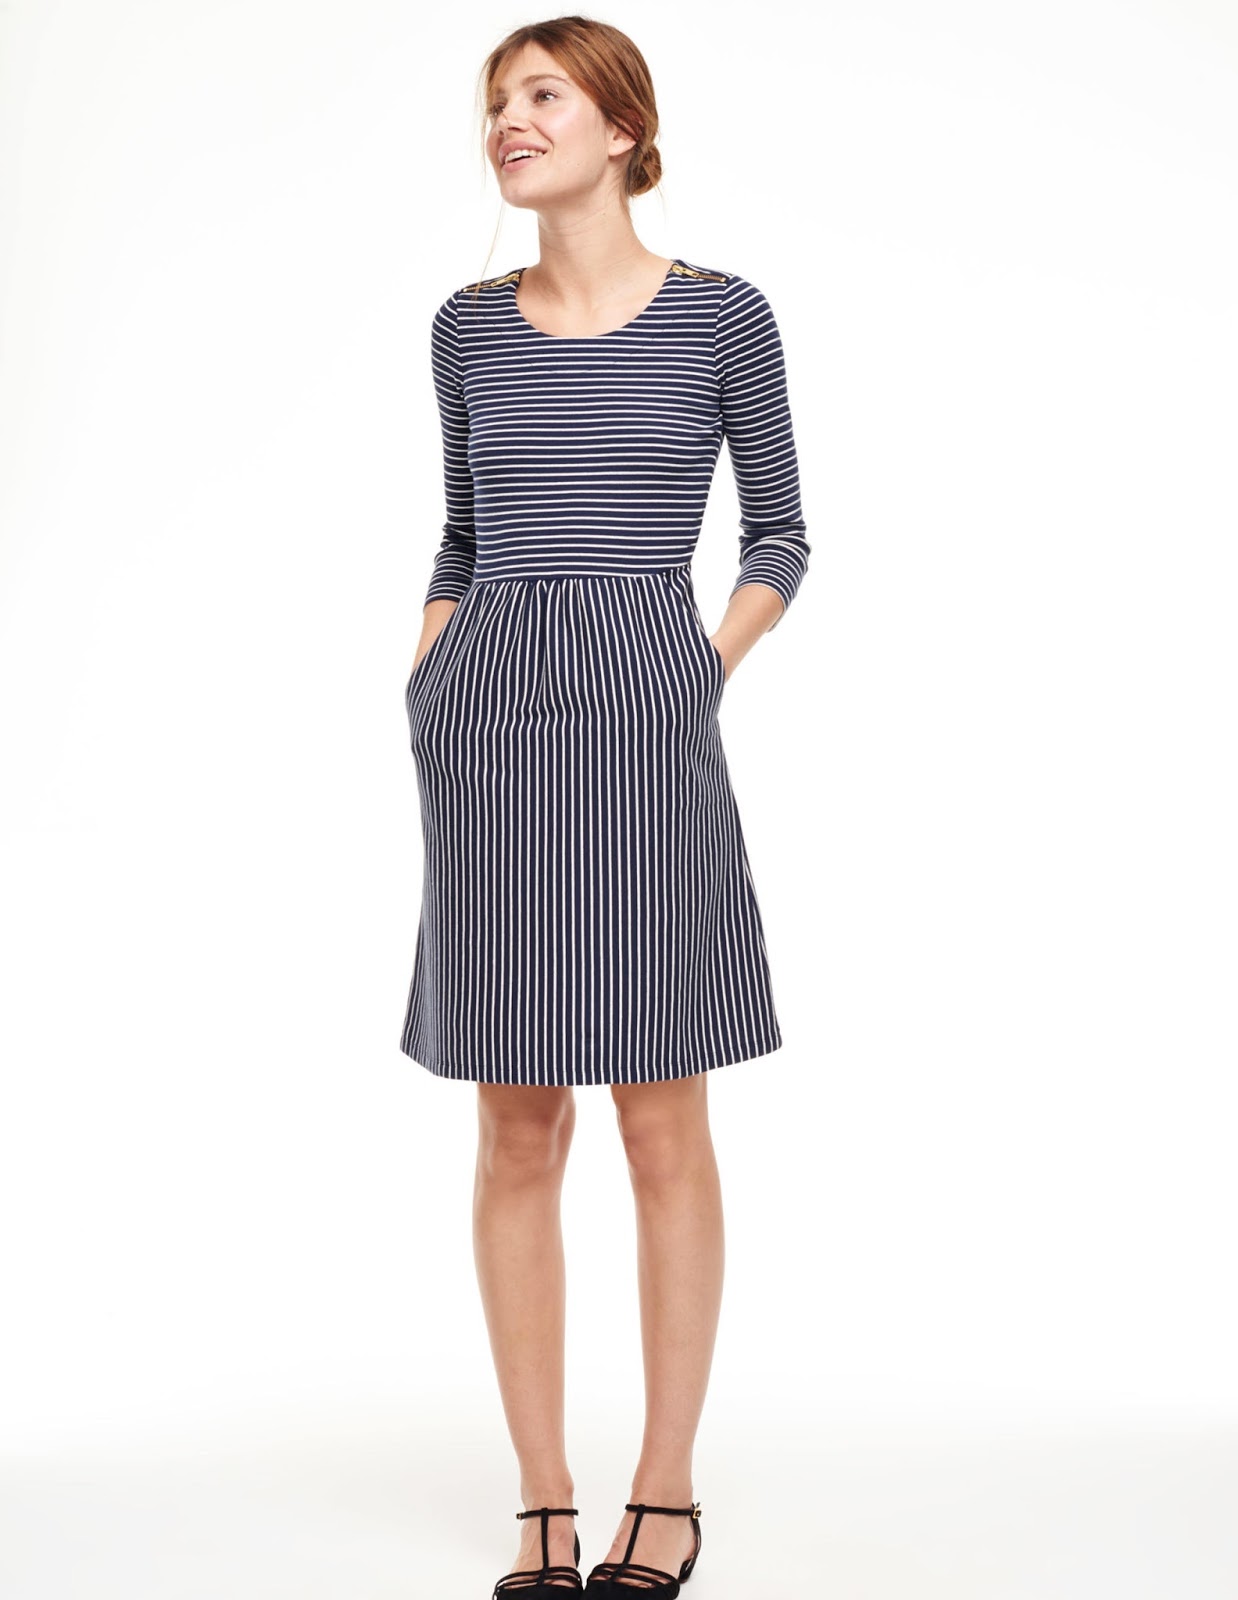 NEW ARRIVALS: Fall at Boden - NYC Recessionista